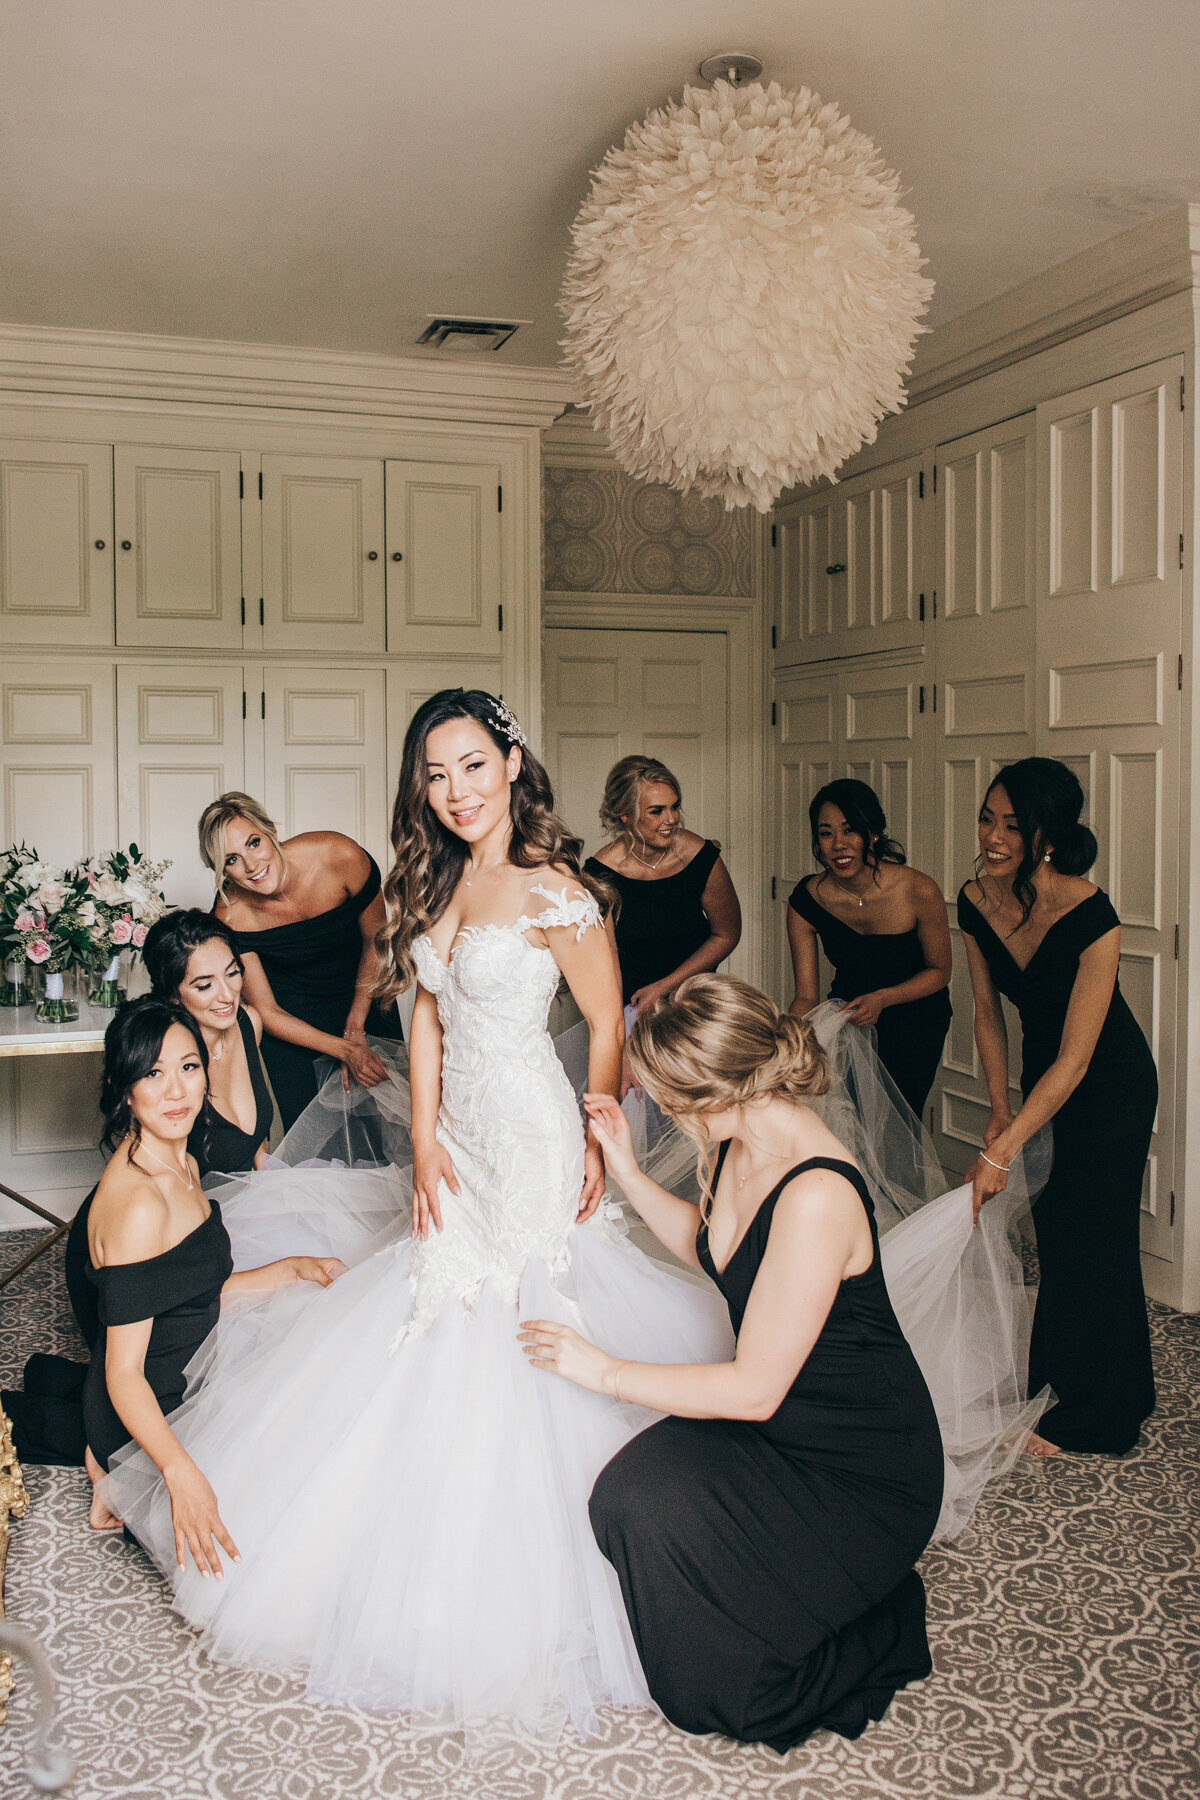 Bride getting ready with the help of bridesmaids in black